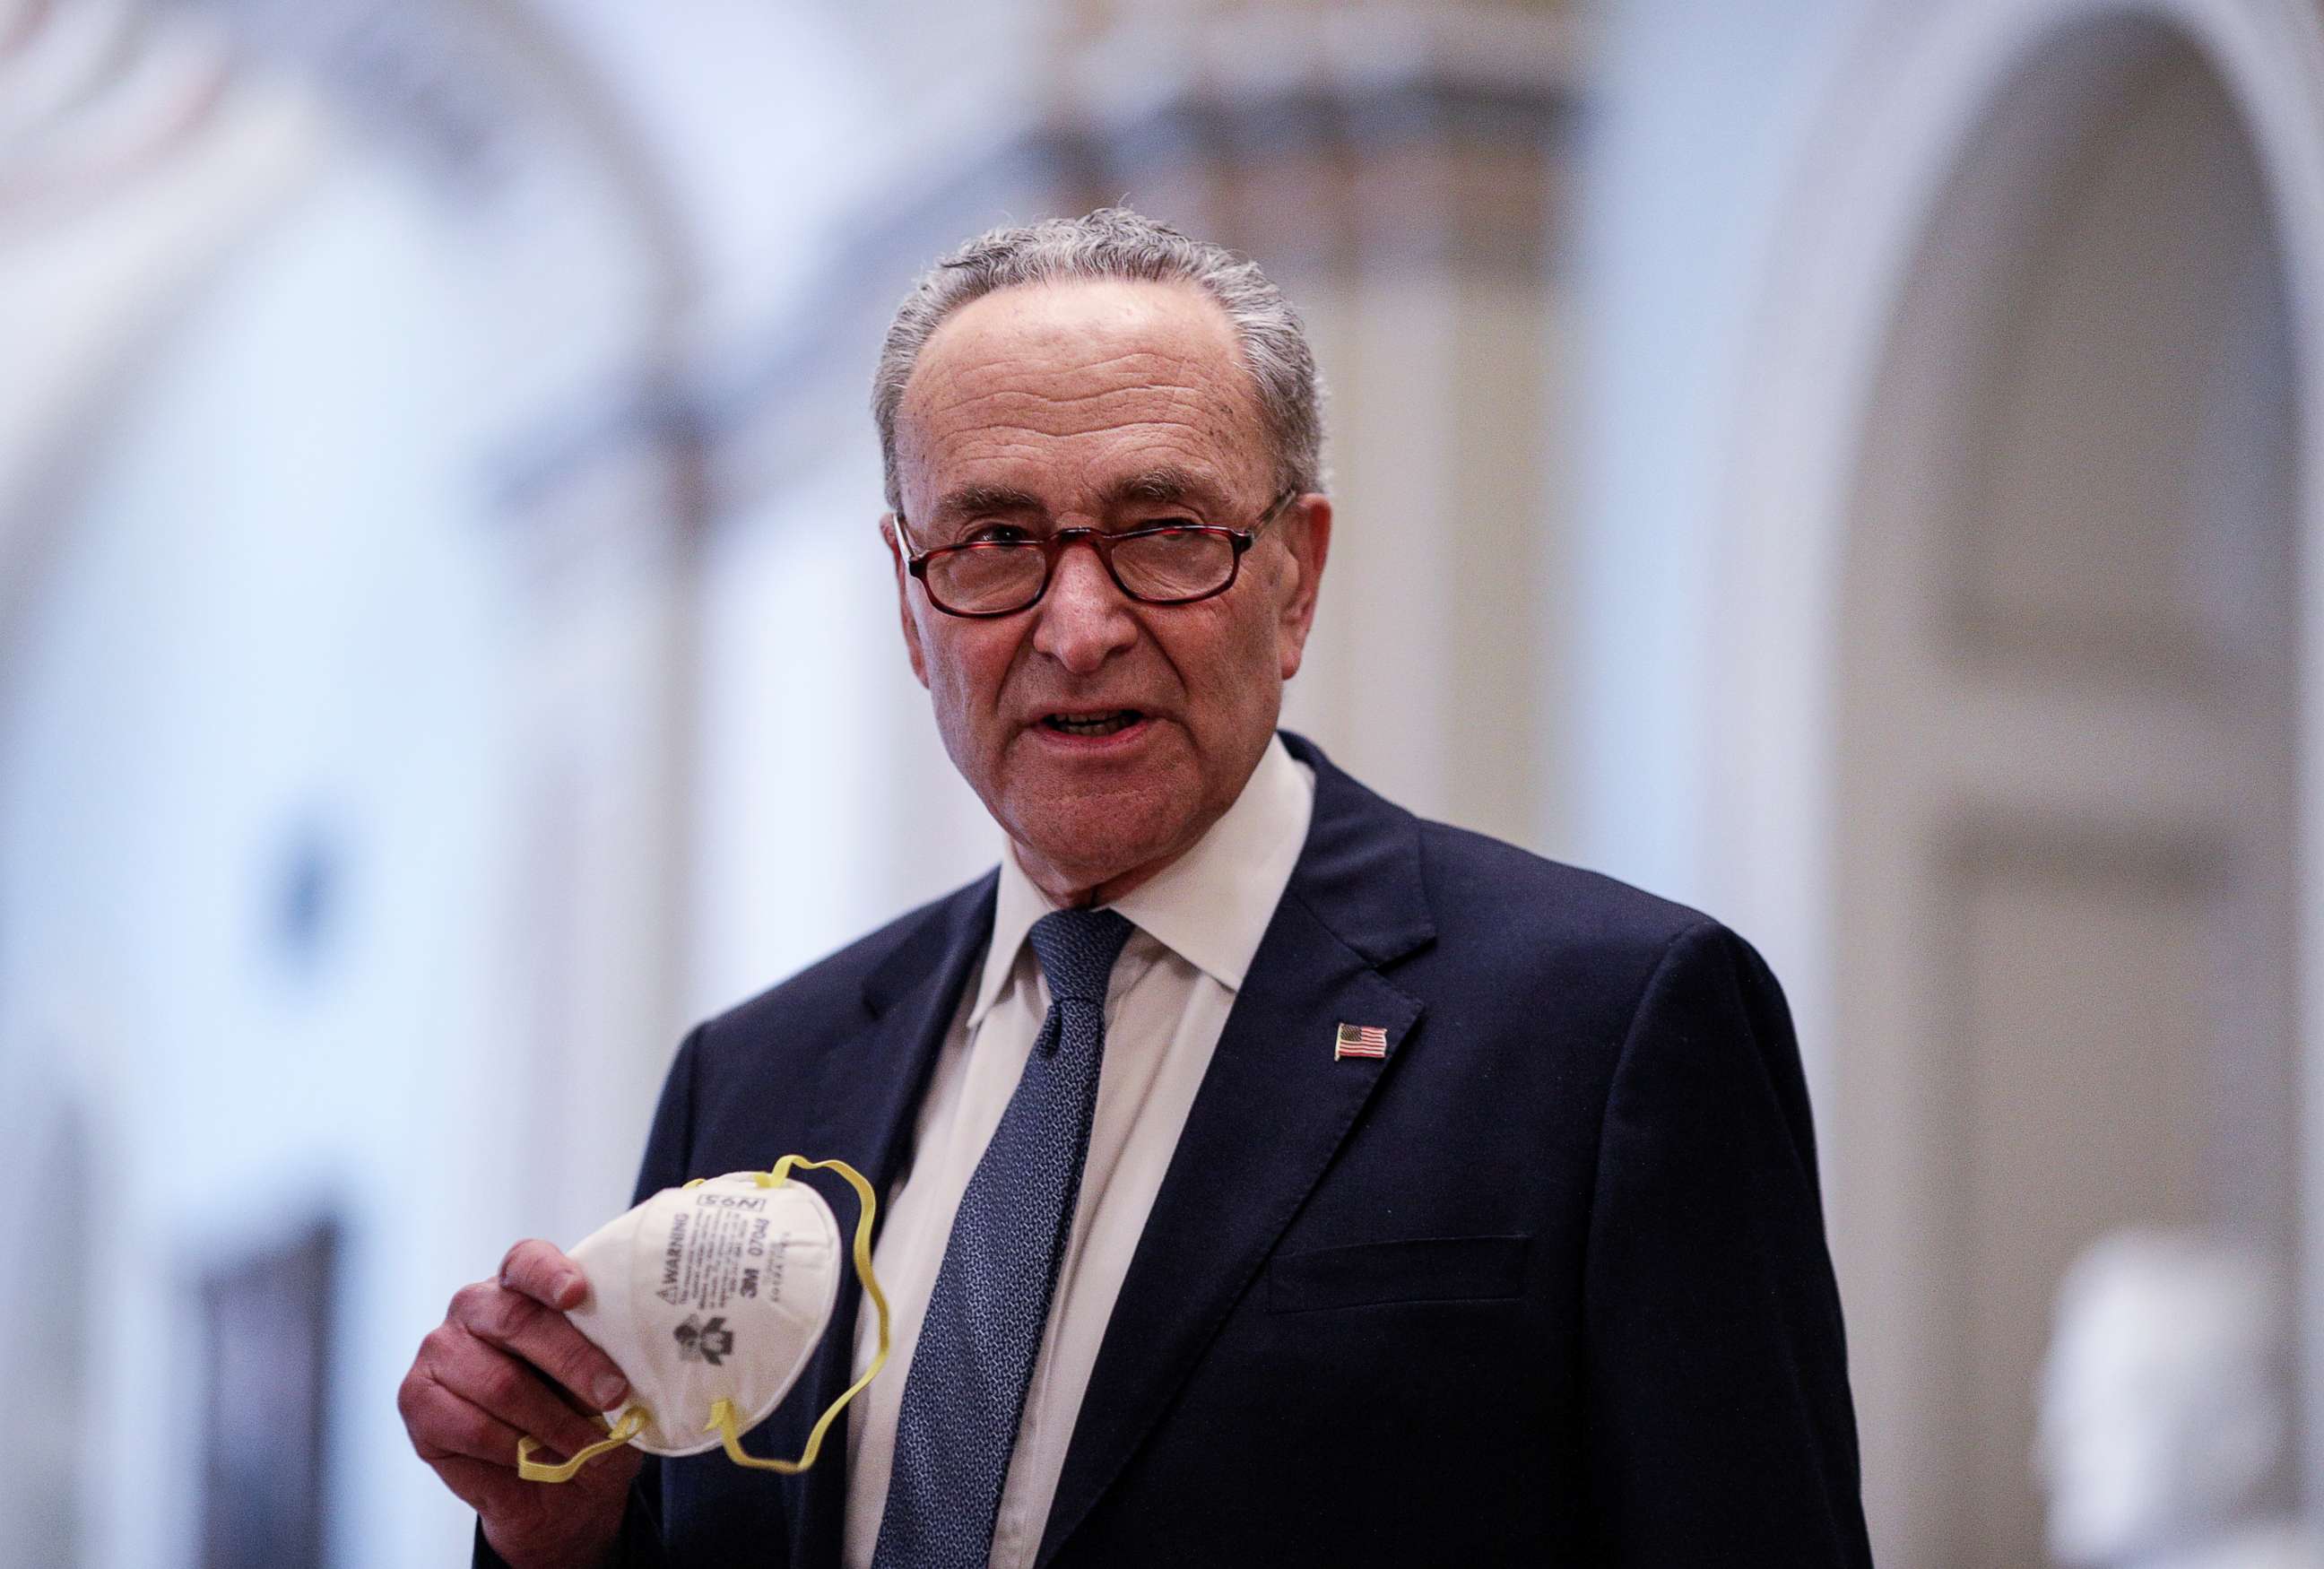 PHOTO: Senate Minority Leader Chuck Schumer carries his face mask as he arrives inside the U.S. Capitol in Washington, April 21, 2020.